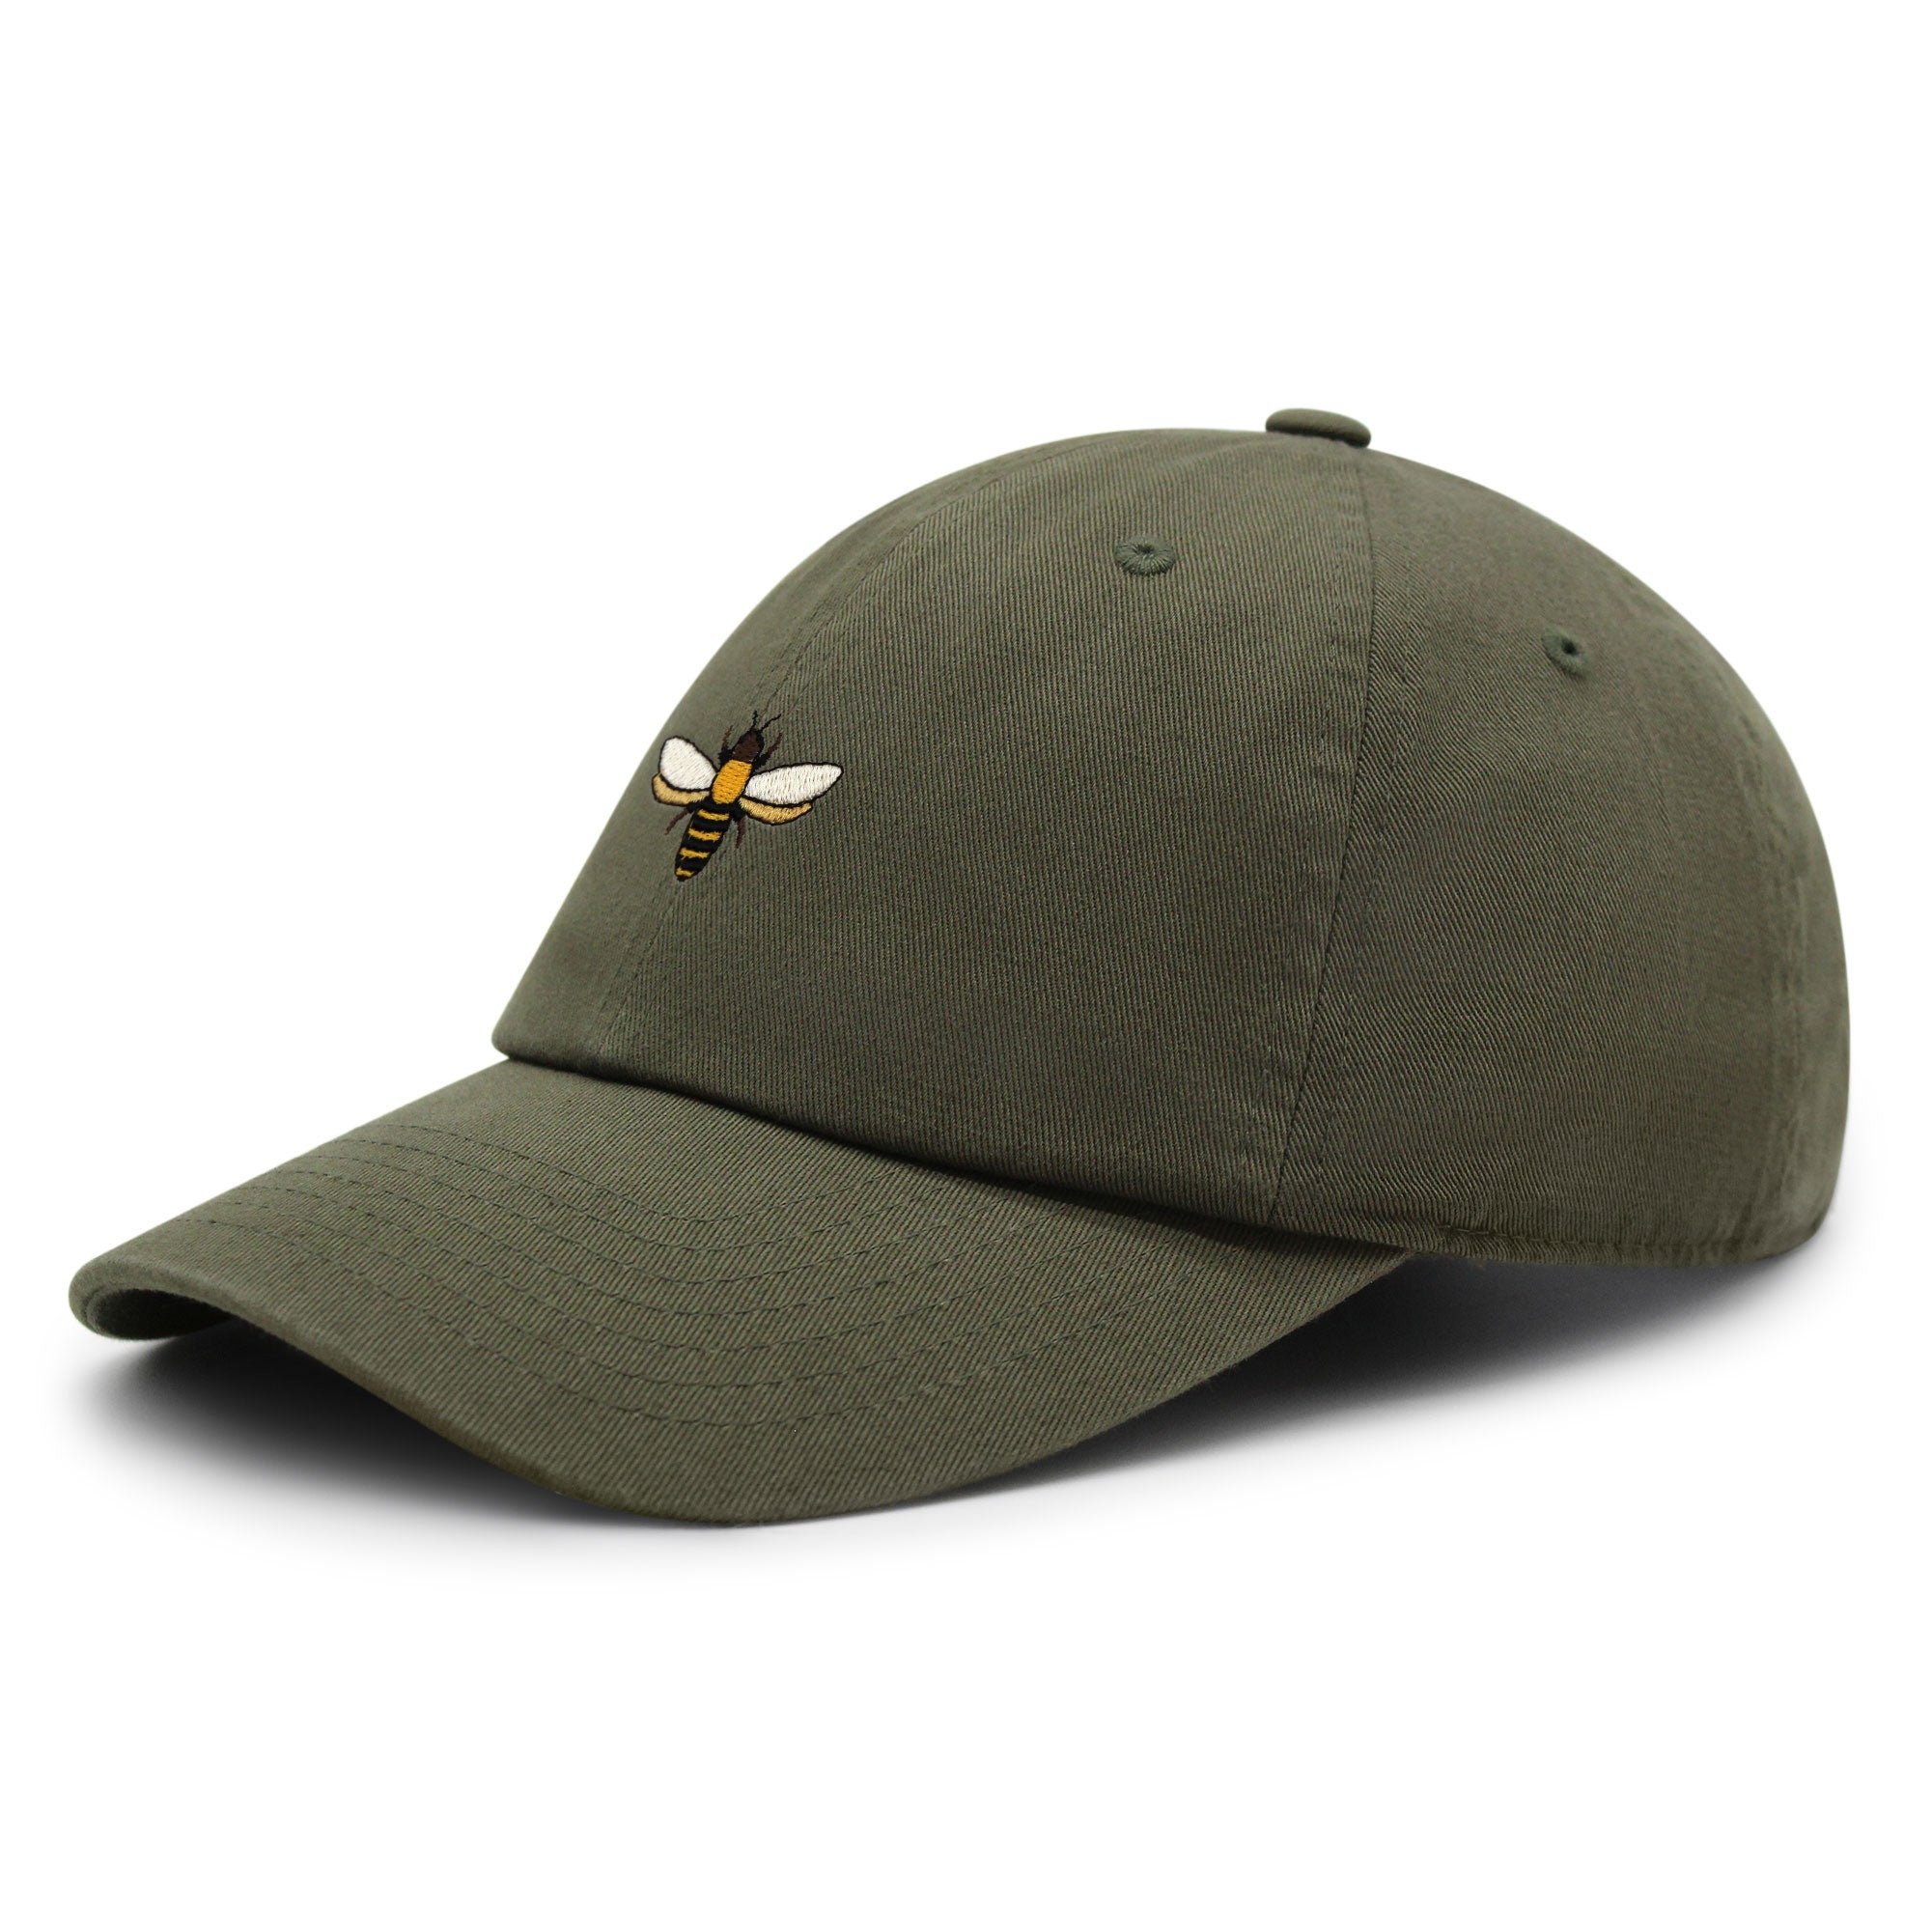 Bee Premium Dad Hat Embroidered Baseball Cap Insect Honey